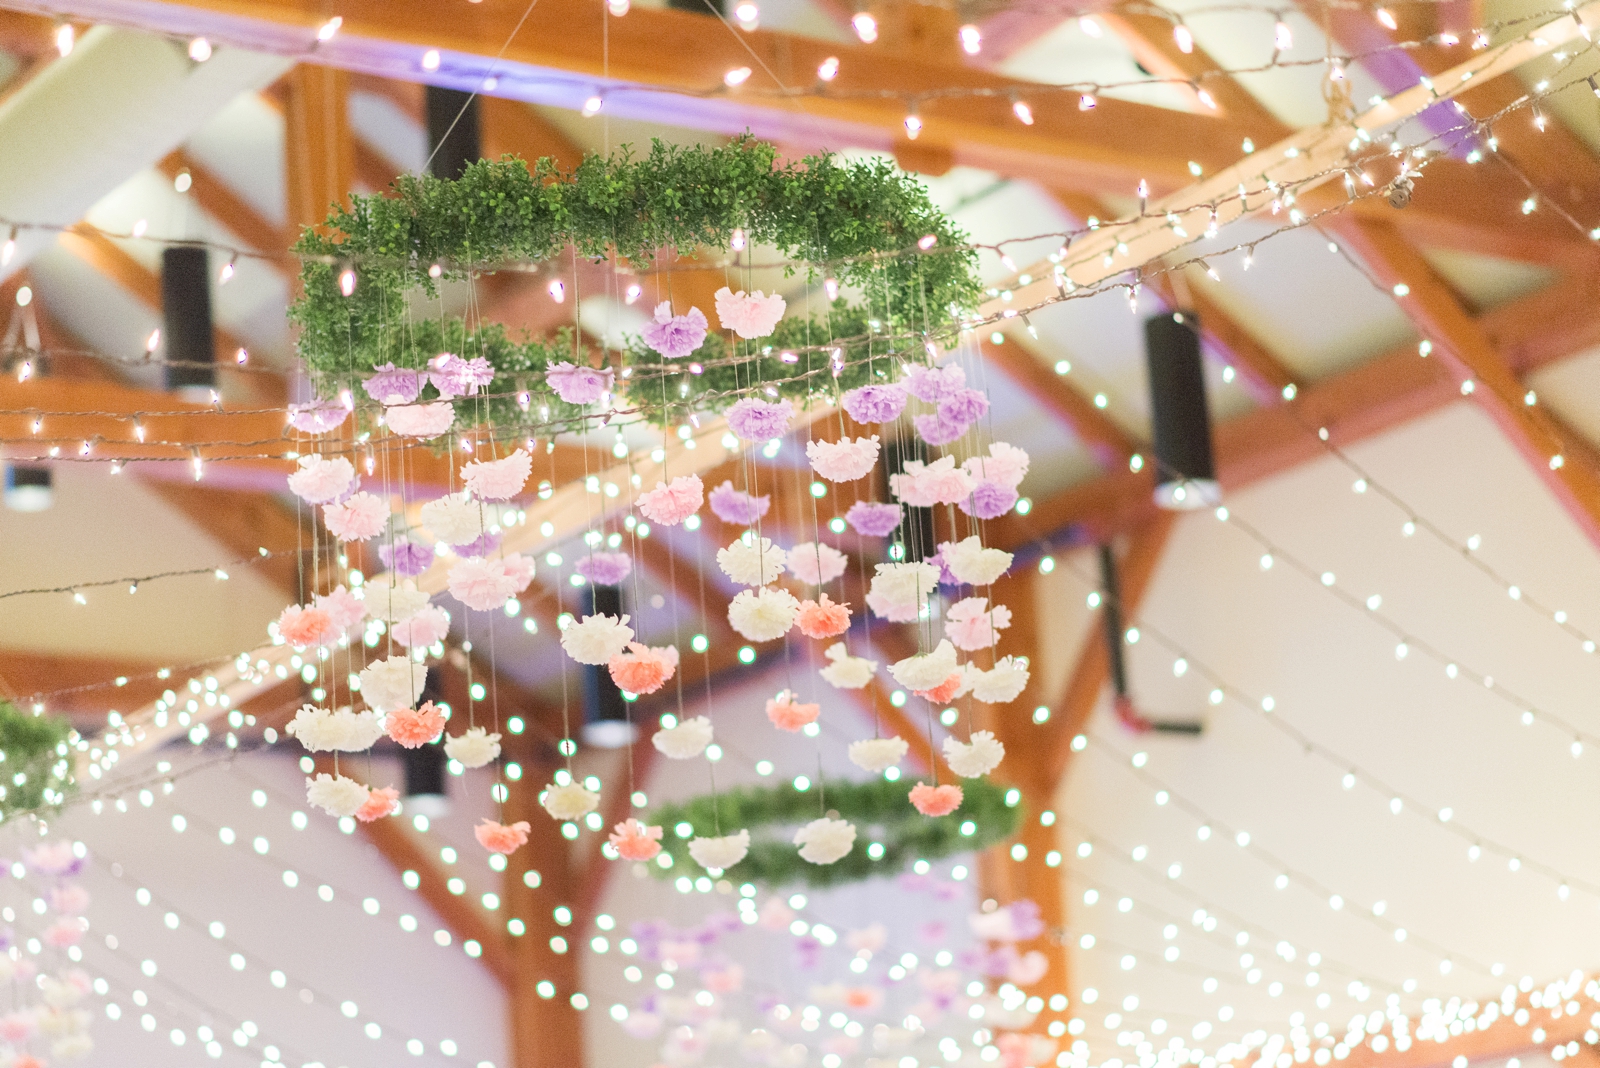 chandelier-made-of-flowers-for-a-wedding-reception